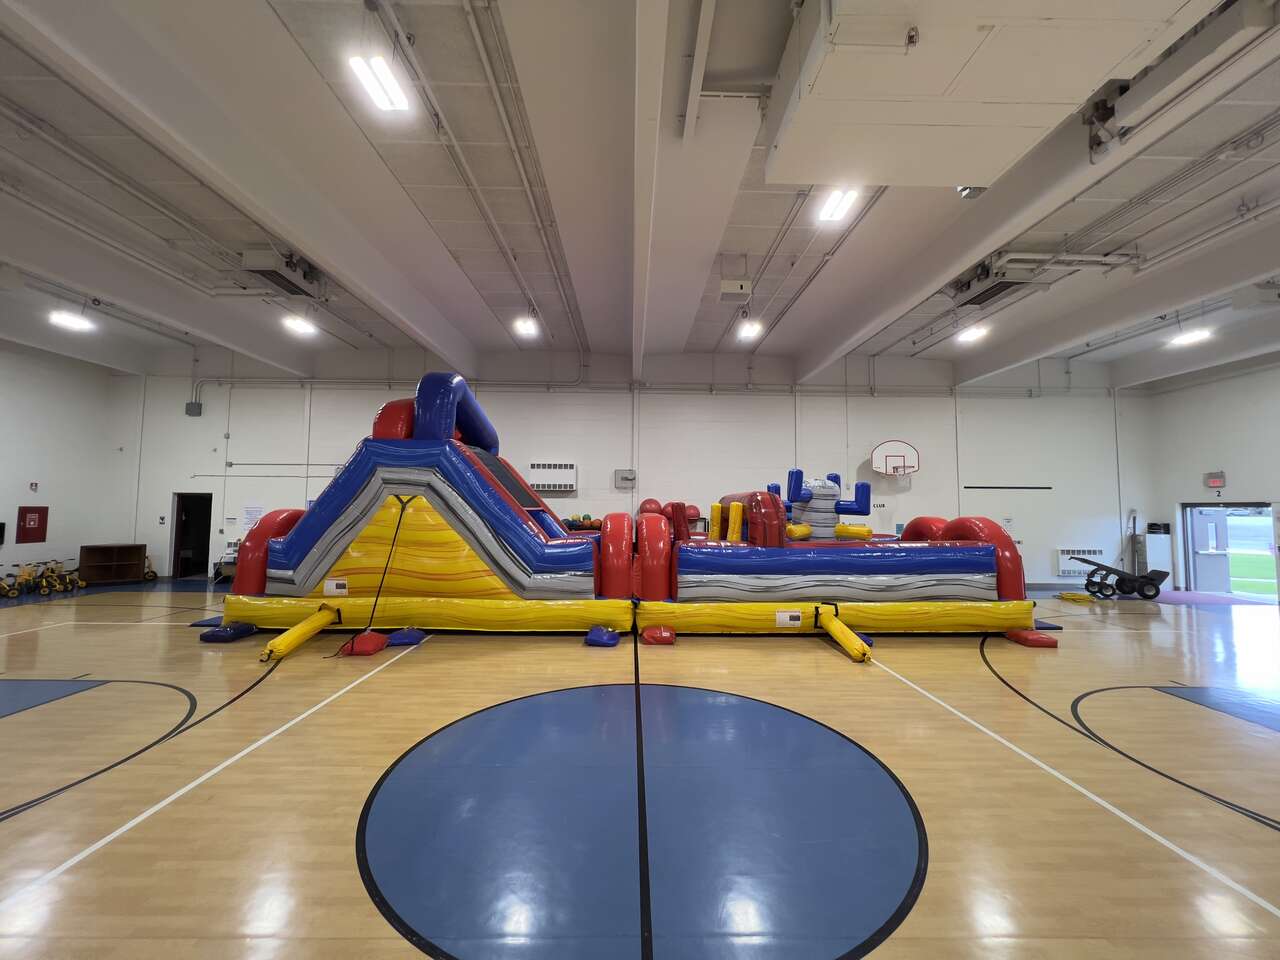 Best church and school party rentals in town by Fun Bounces Rental in burr ridge, IL 60527 